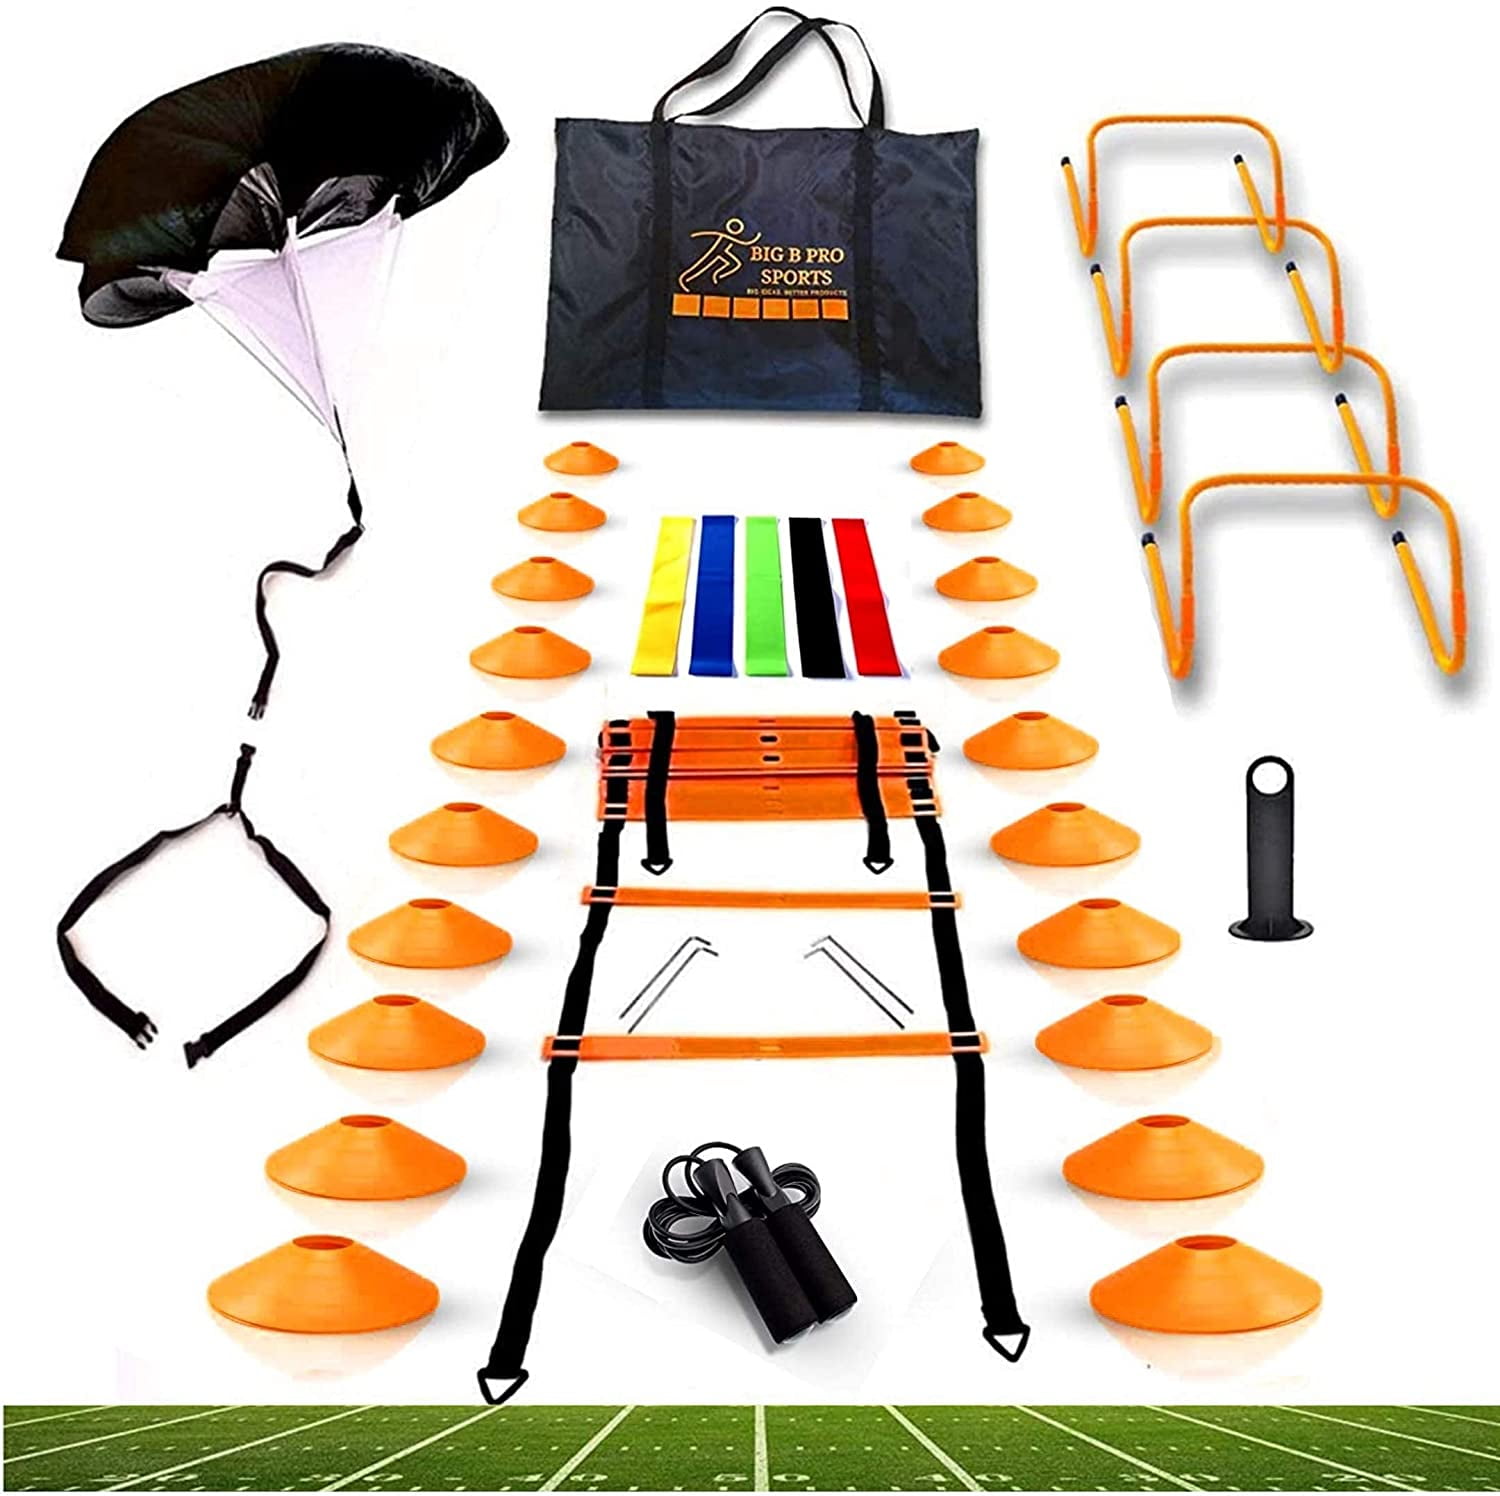 NEW Precision Speed Agility Cones Set Cheap Football Fitness Hurdle Training 